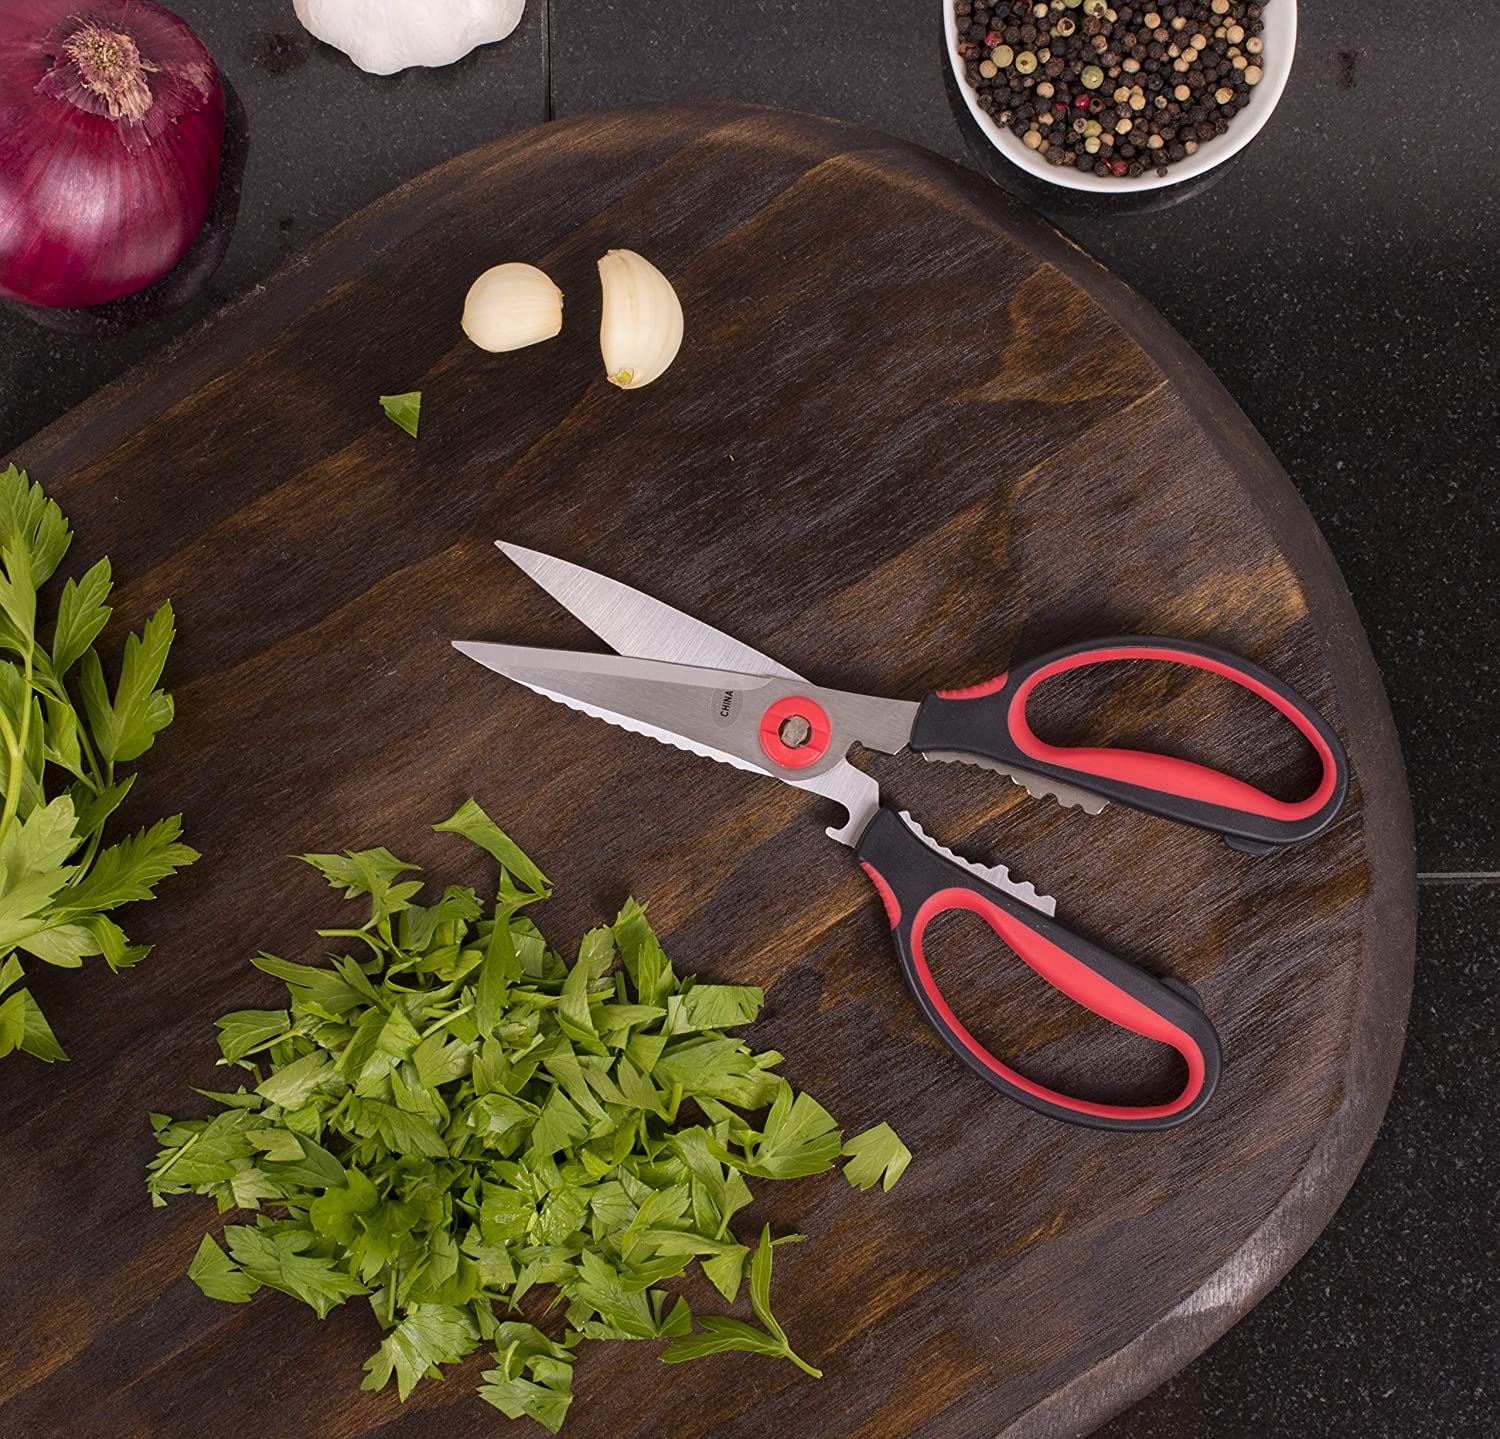 the kitchen shears displayed on a dark stained cutting board next to cilantro and garlic on a black countertop